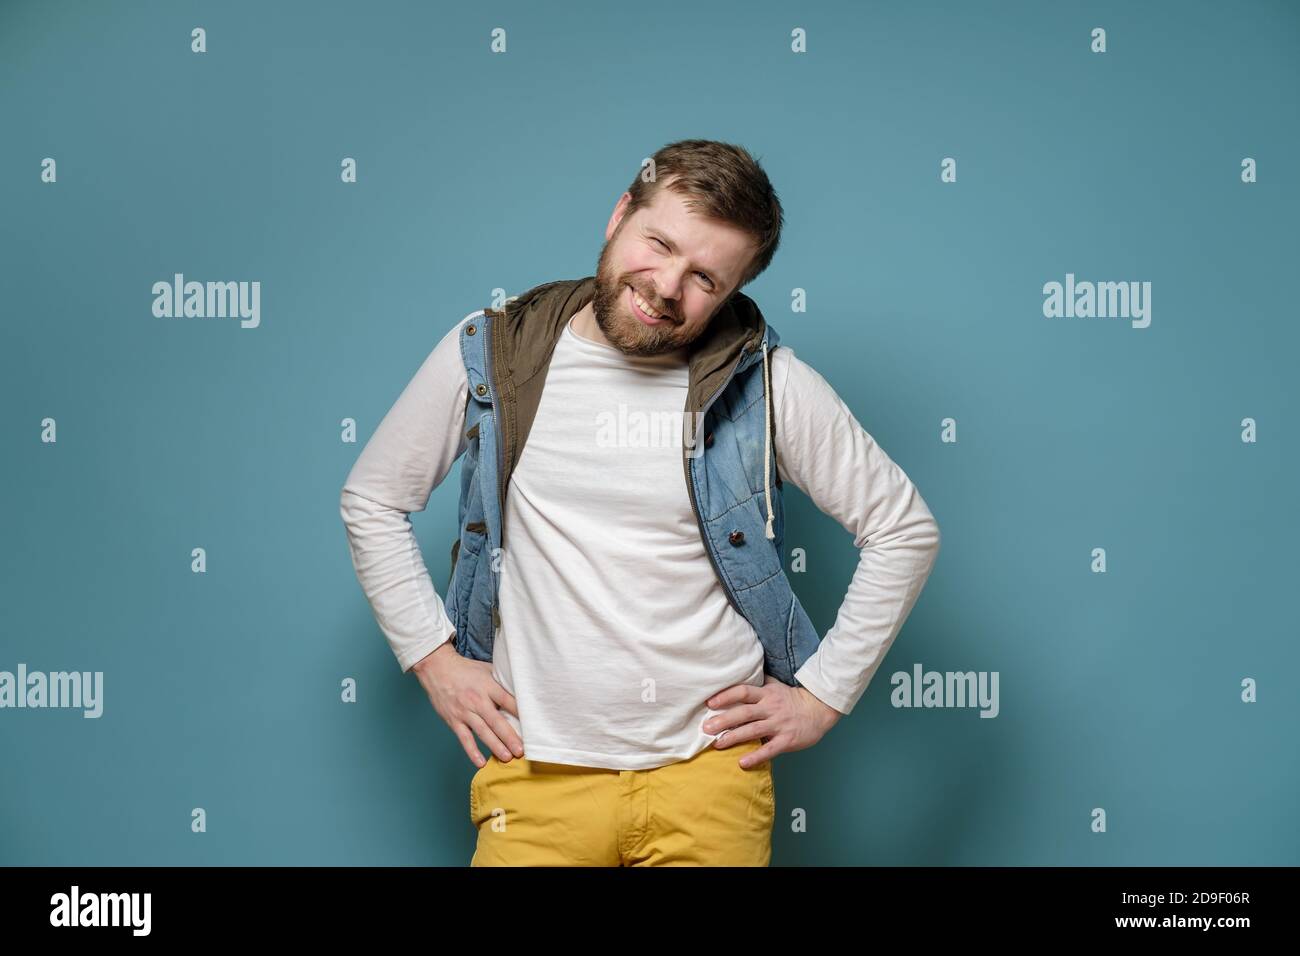 Shy bearded Caucasian man in a vest smiling cute and looking at the camera, on a blue background. Stock Photo